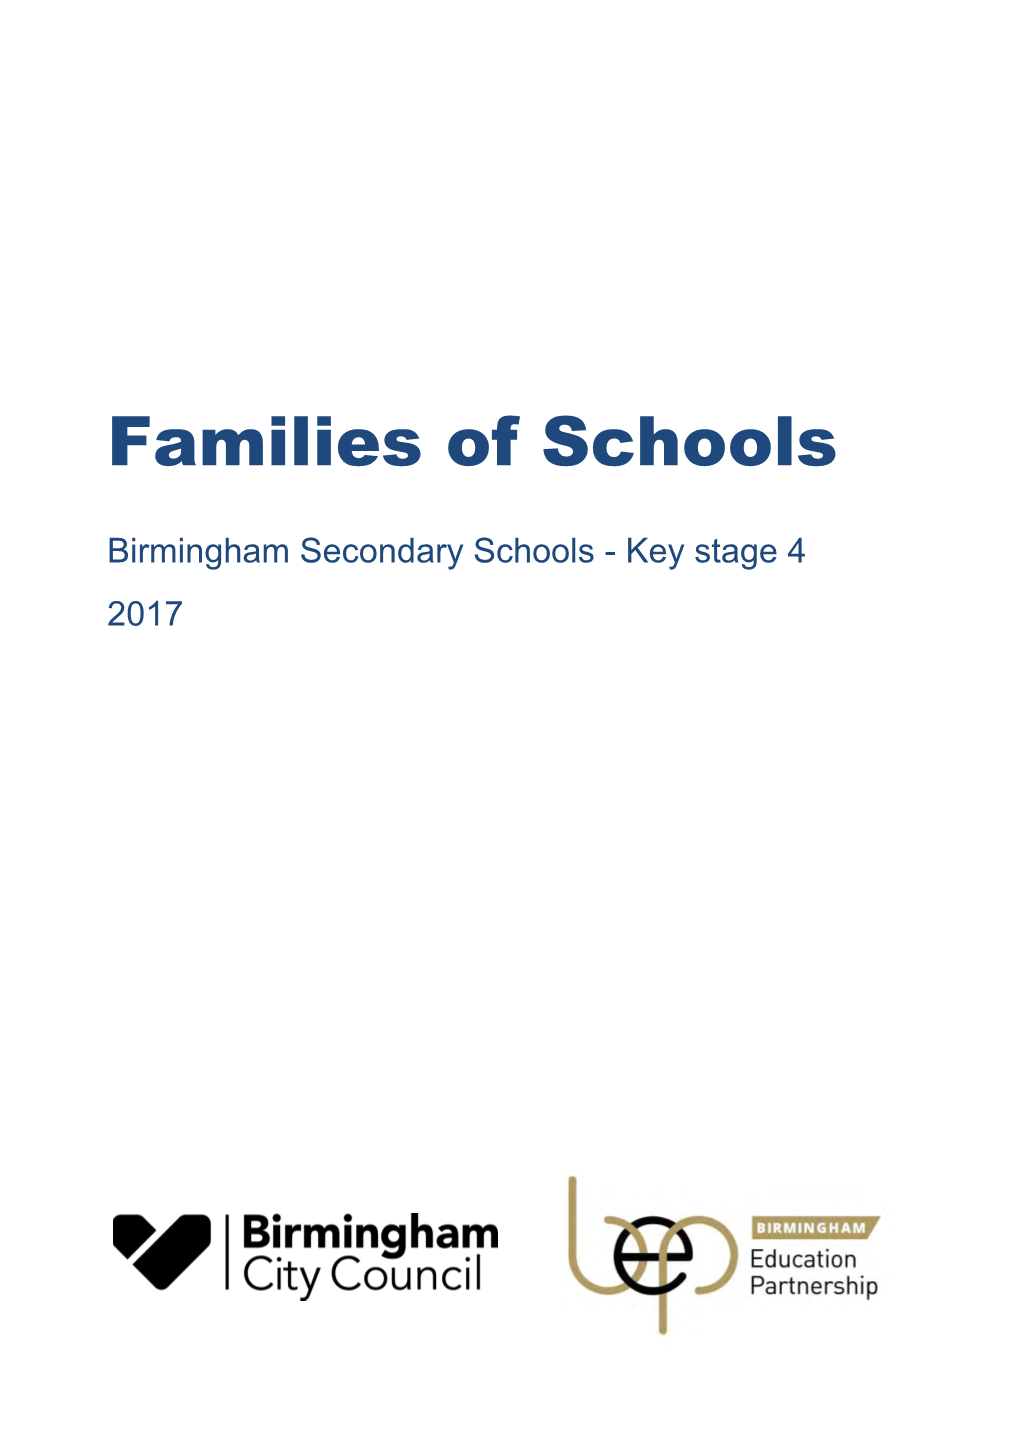 Key Stage 4 Families of Schools 2017